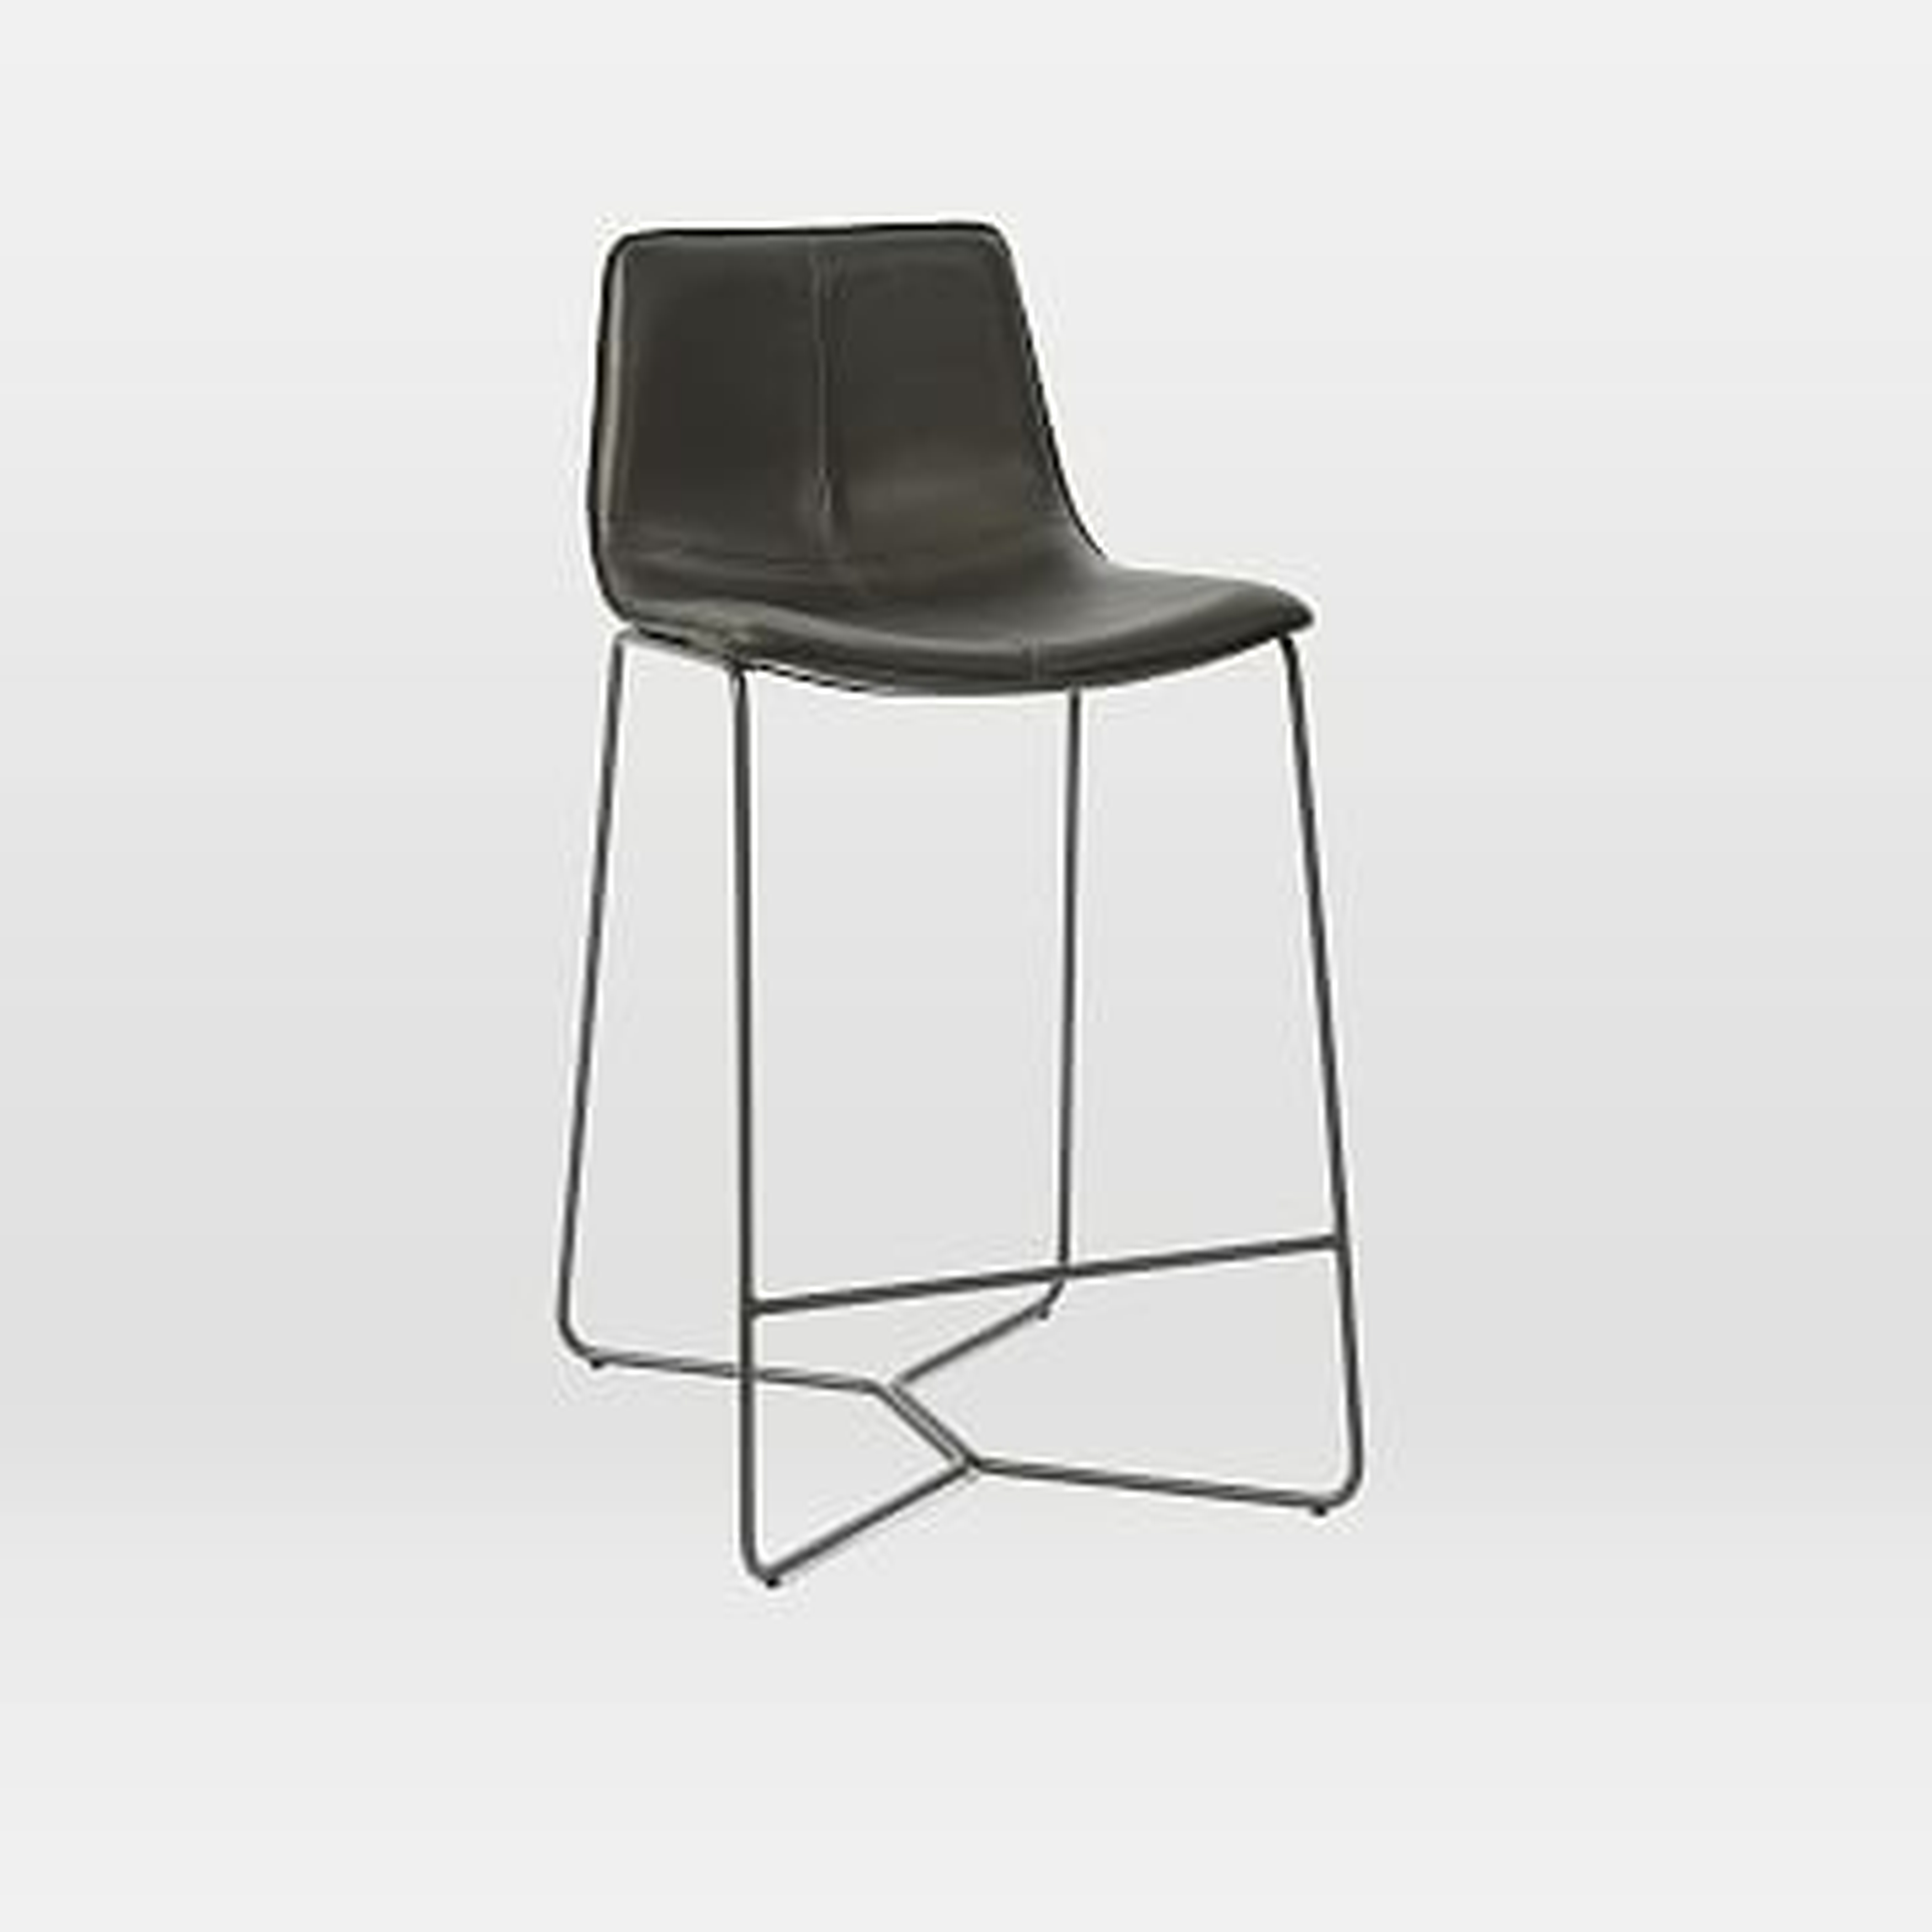 Slope Leather Counter Stool, Charcoal - West Elm